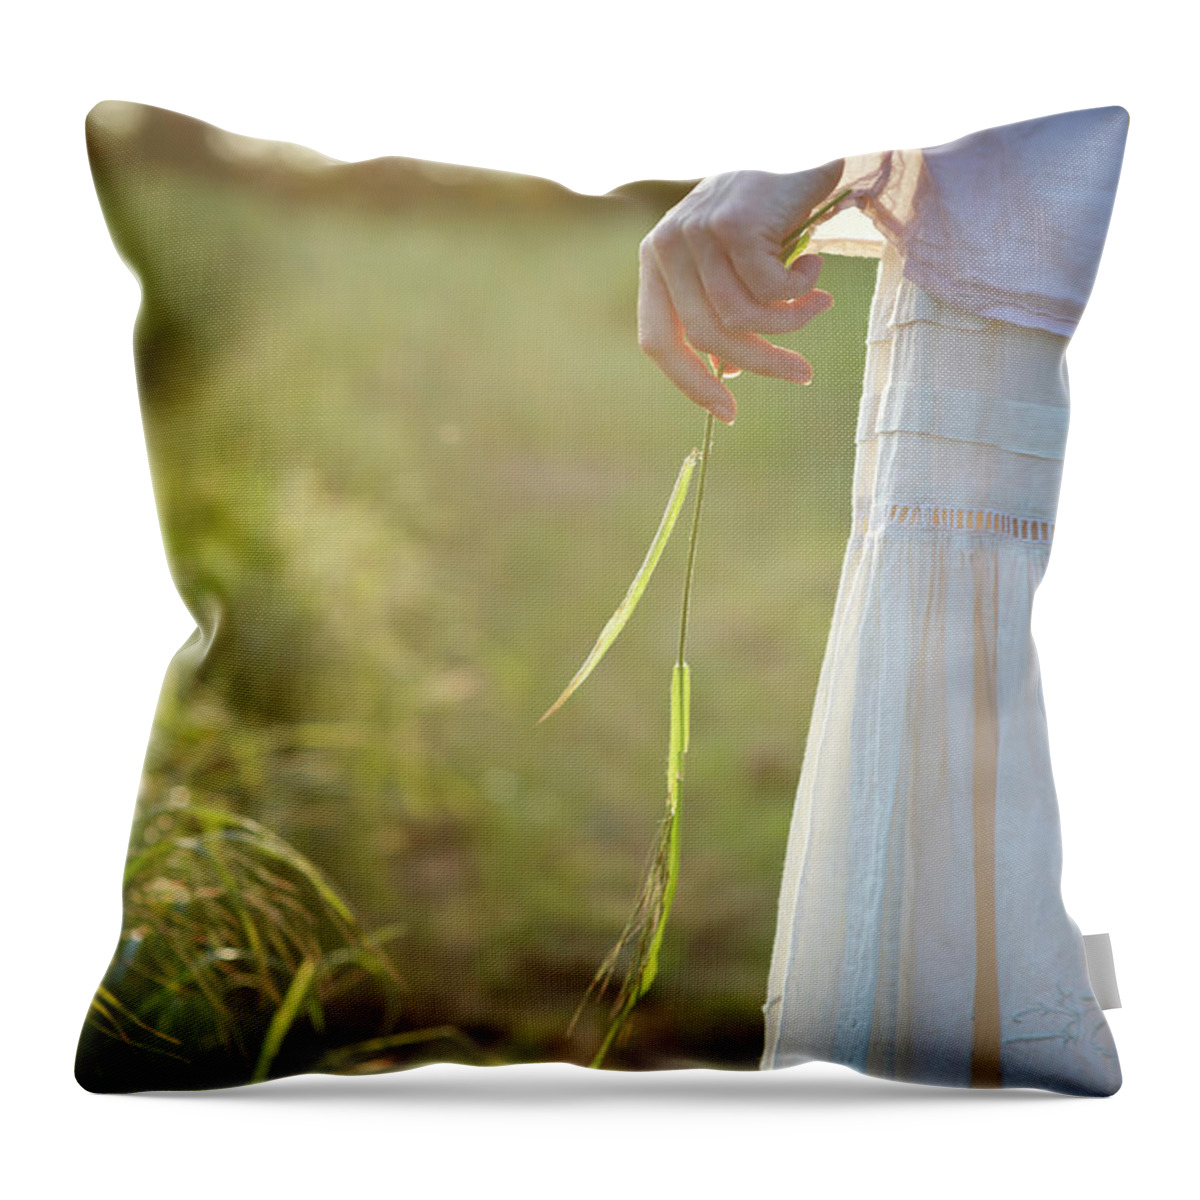 Grass Throw Pillow featuring the photograph Female Hand Holding Grass In by Dougal Waters